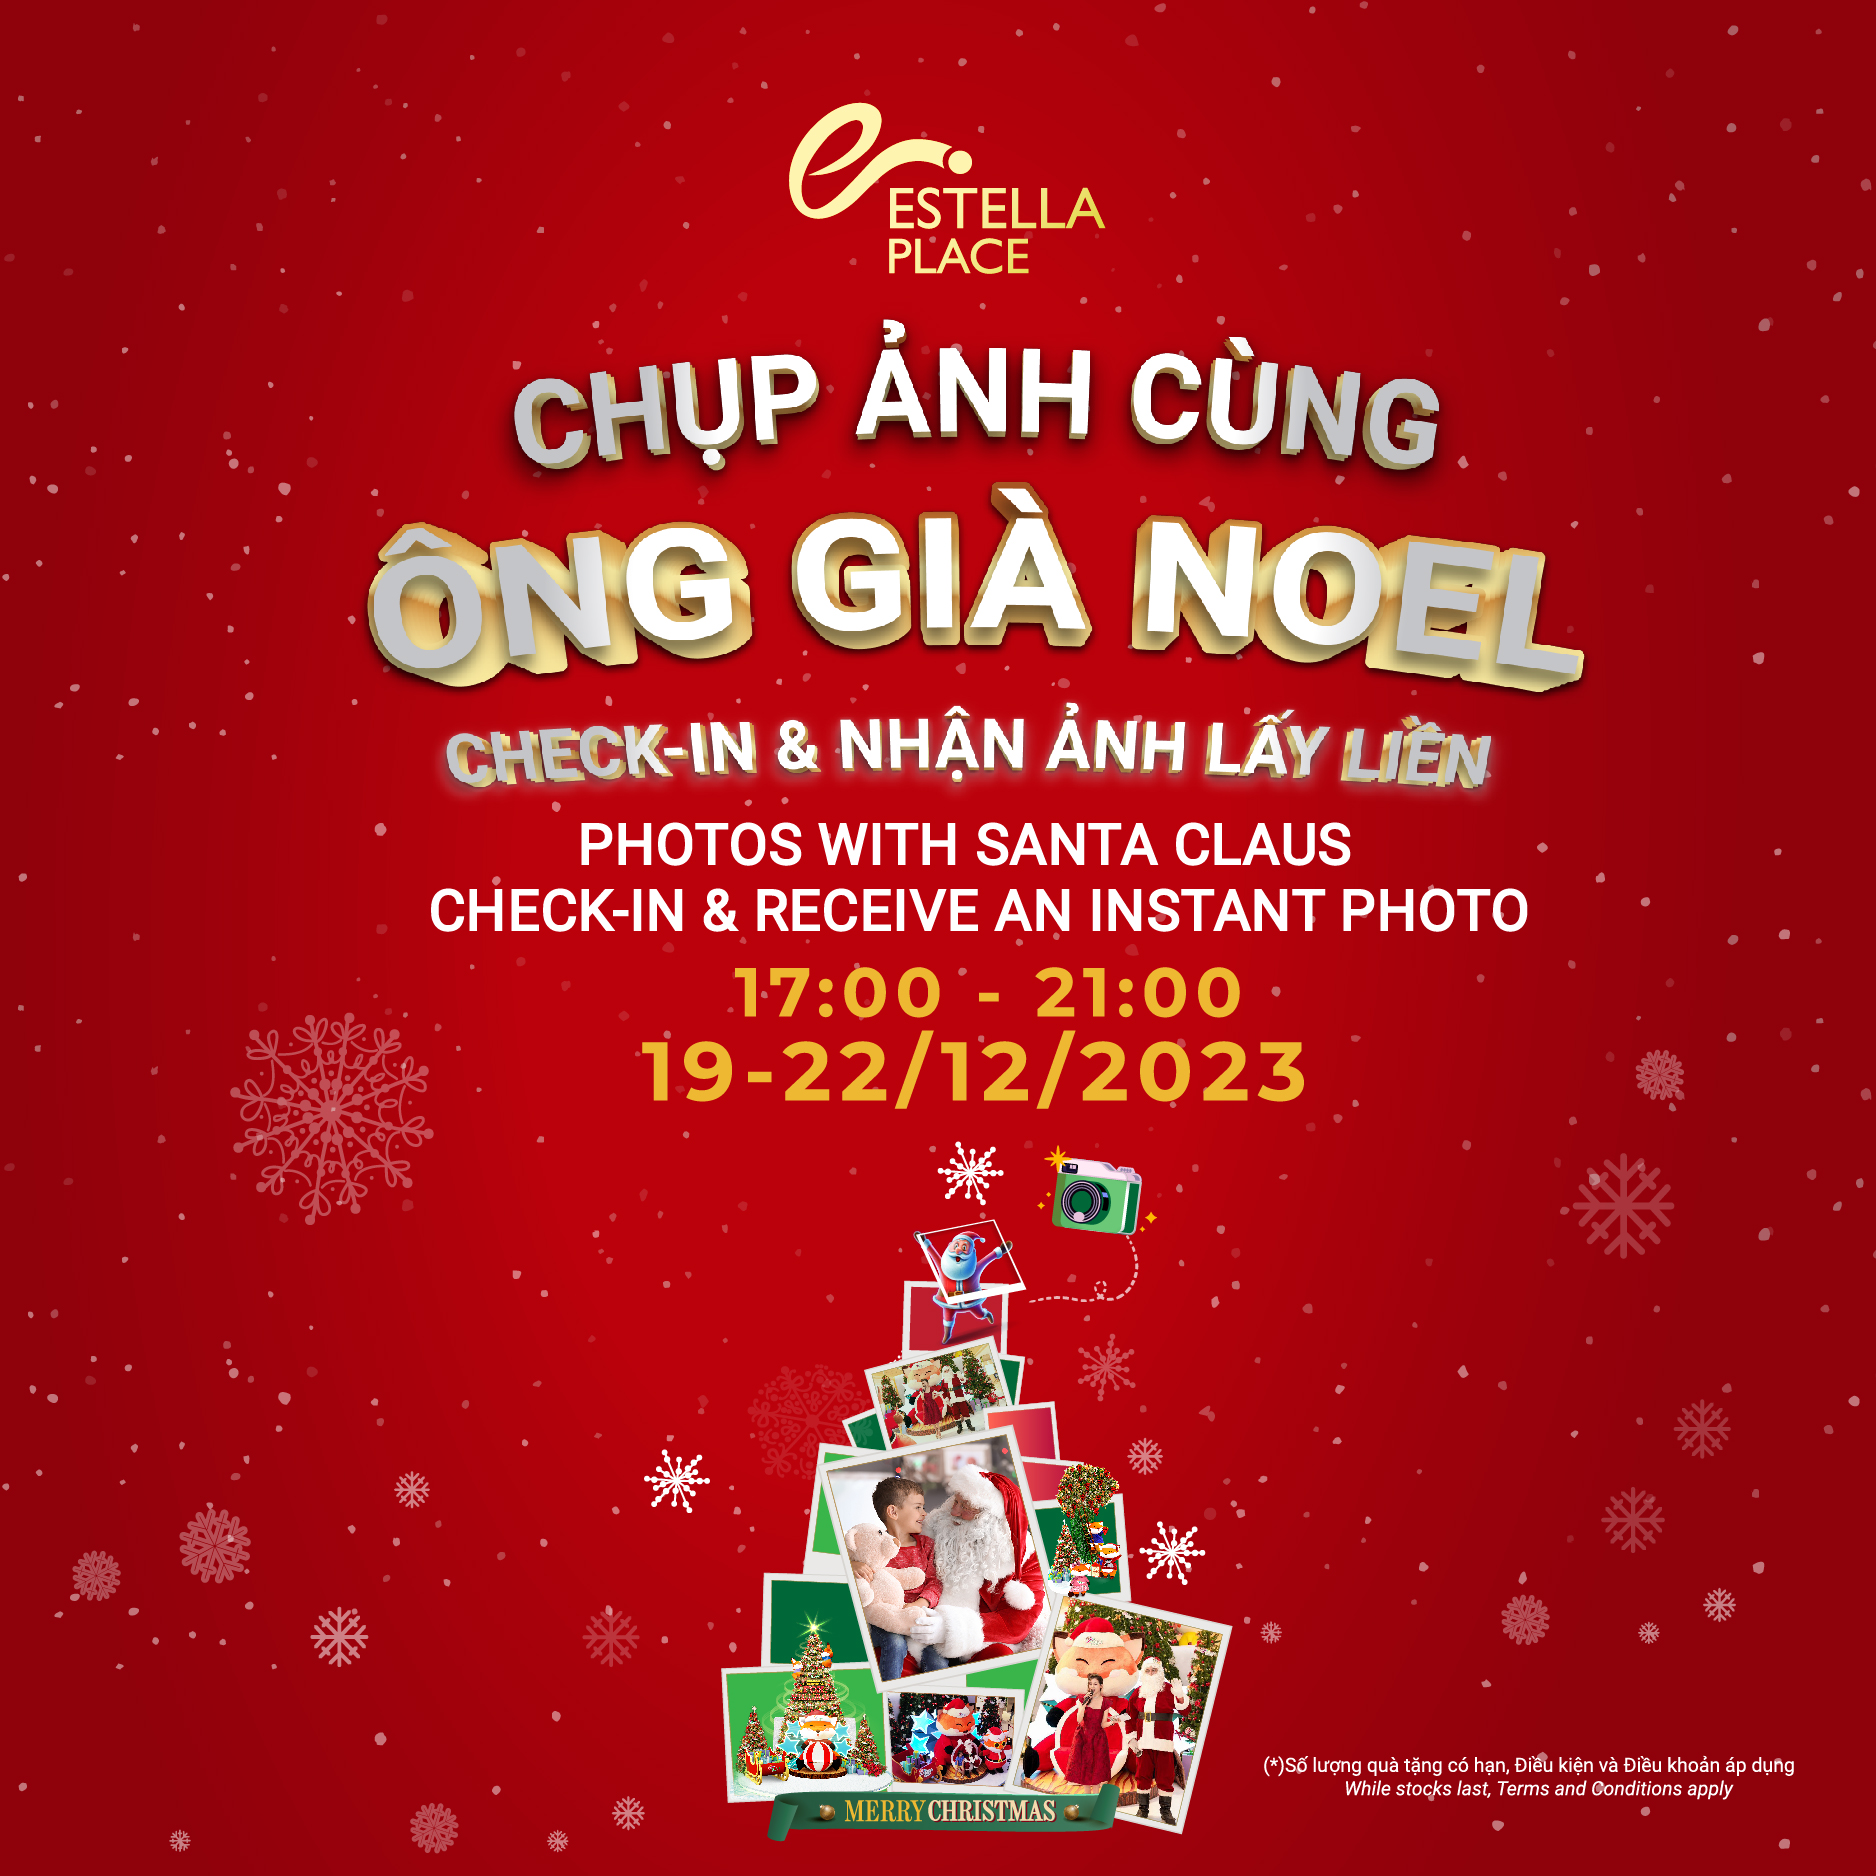 PHOTOS WITH SANTA CLAUS🎅_CHECK-IN & RECEIVE AN INSTANT PHOTO📸